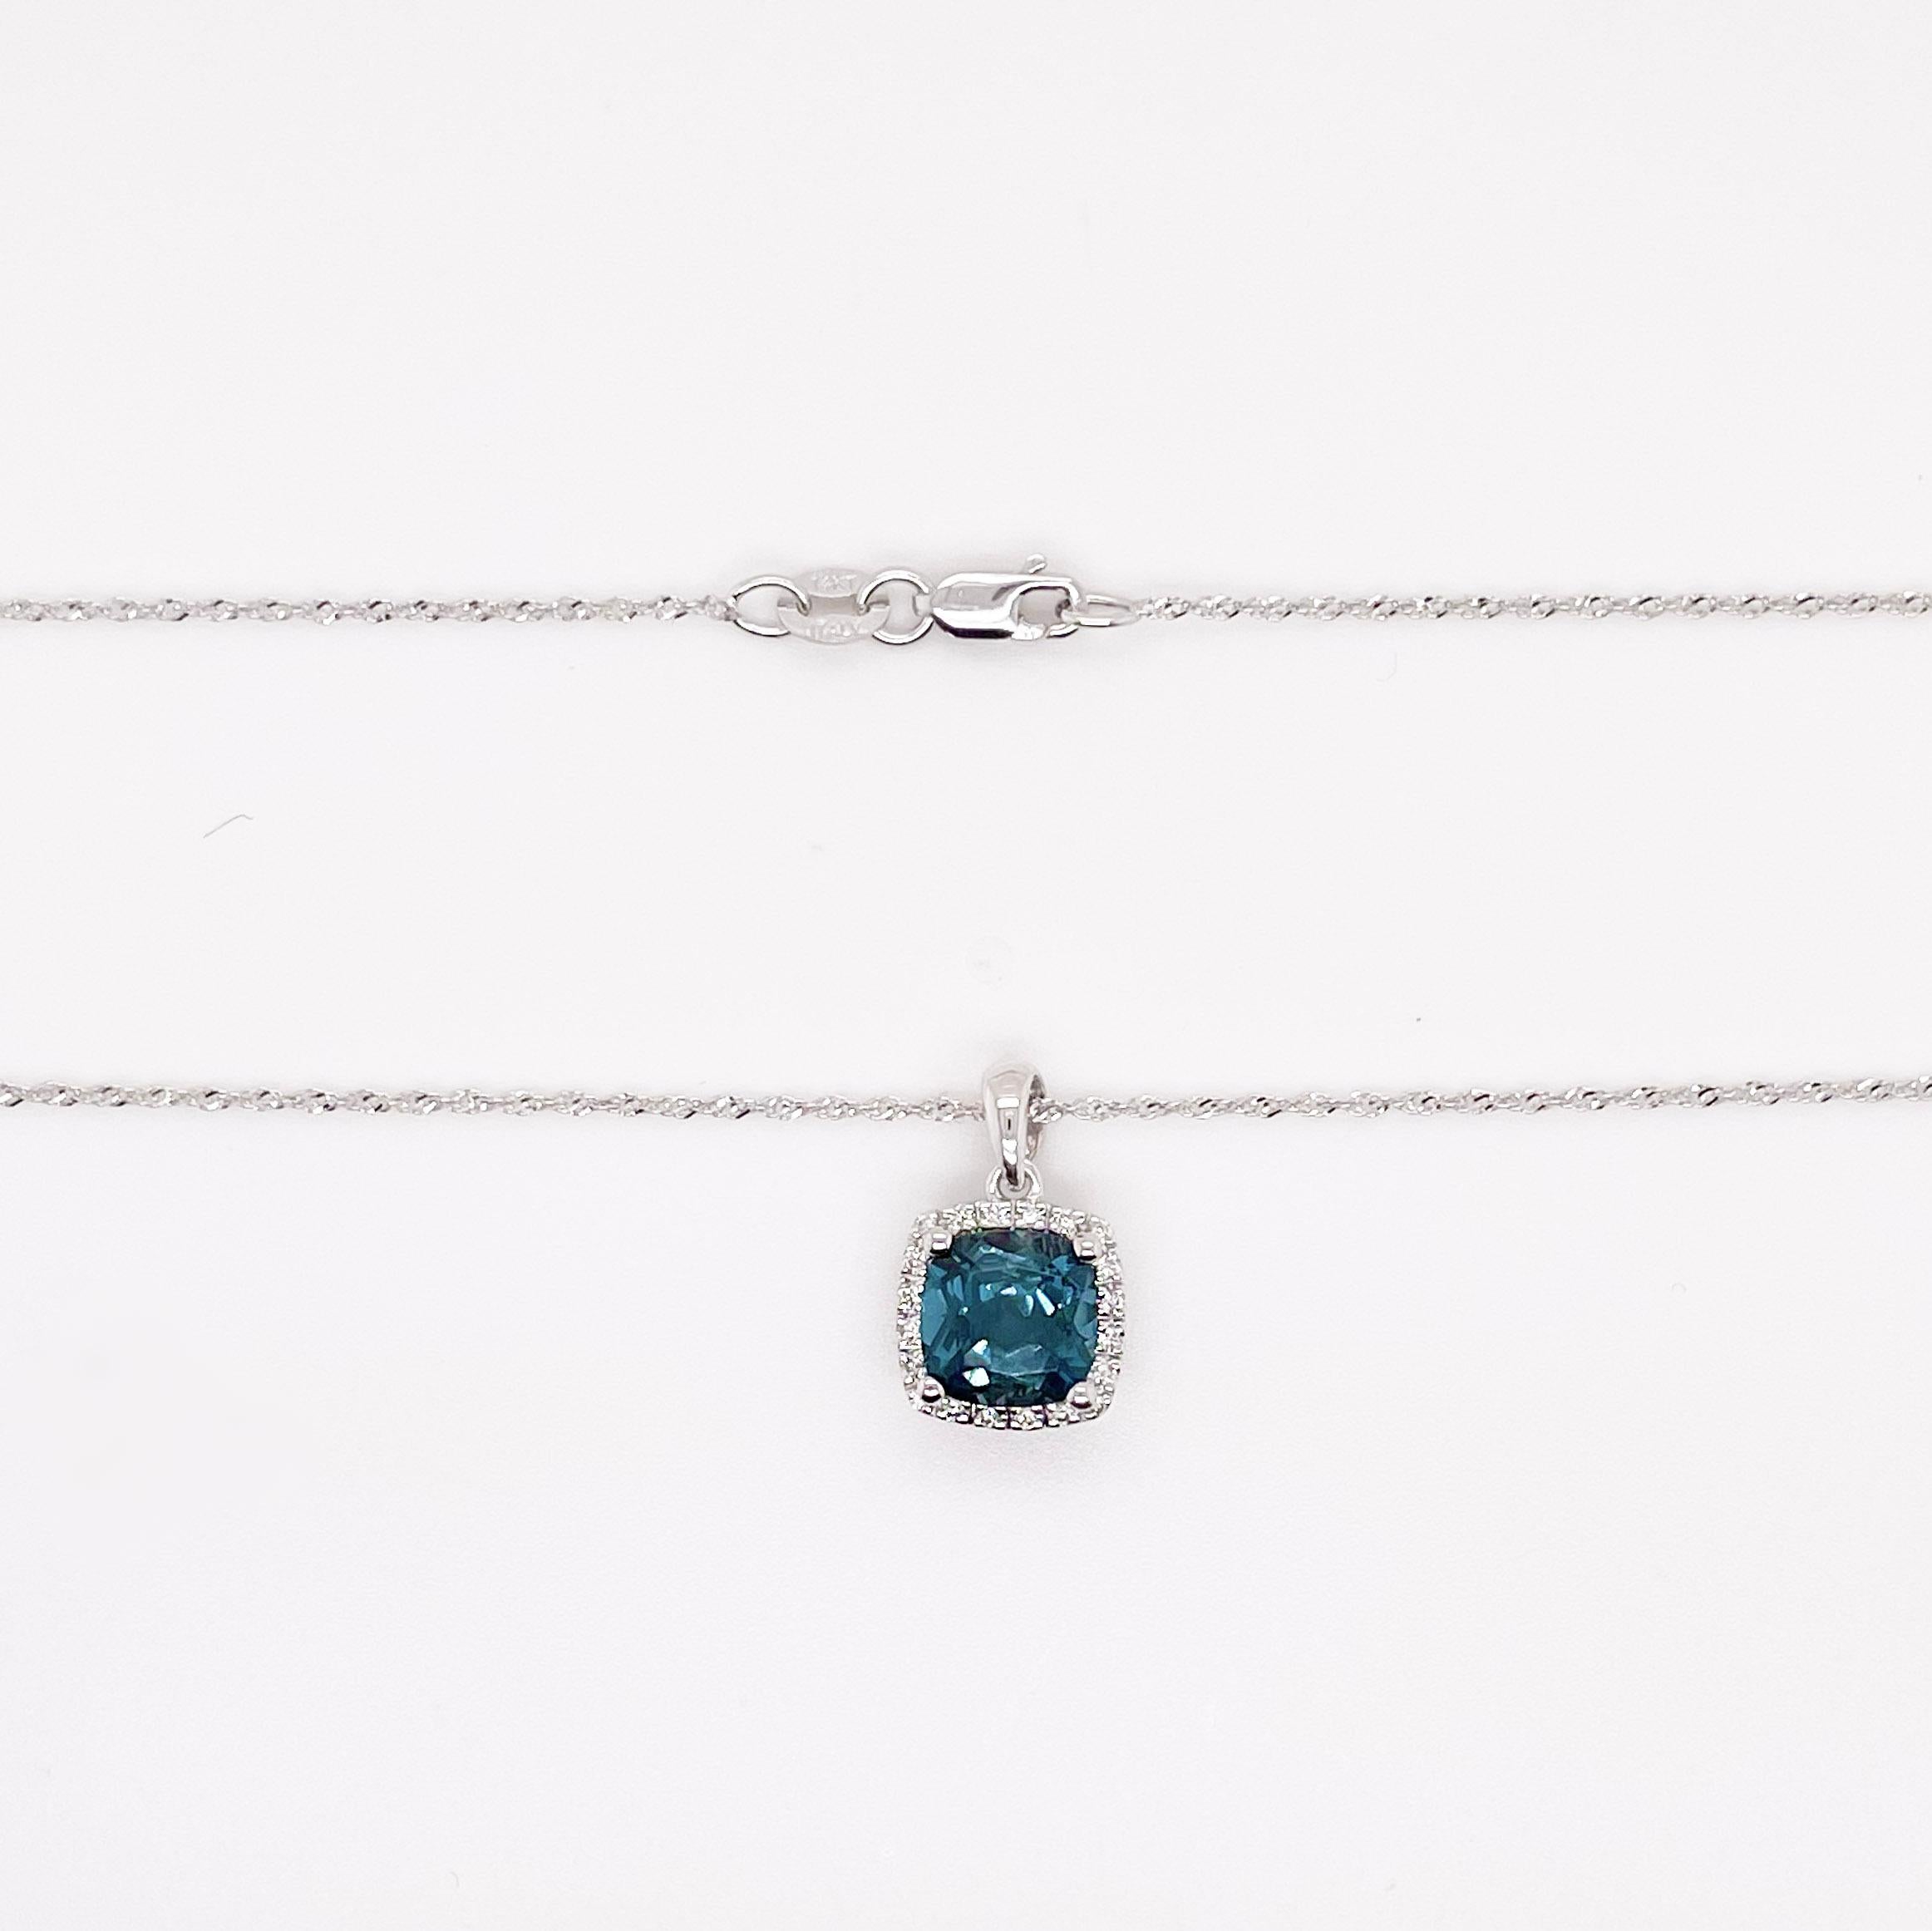 This cushion-shaped Midnight Blue Topaz has an incredibly vibrant color that is made even more beautiful by the diamond halo. The pendant pairs perfectly with the delicate baby rope chain that it is hanging on. This necklace would make the perfect